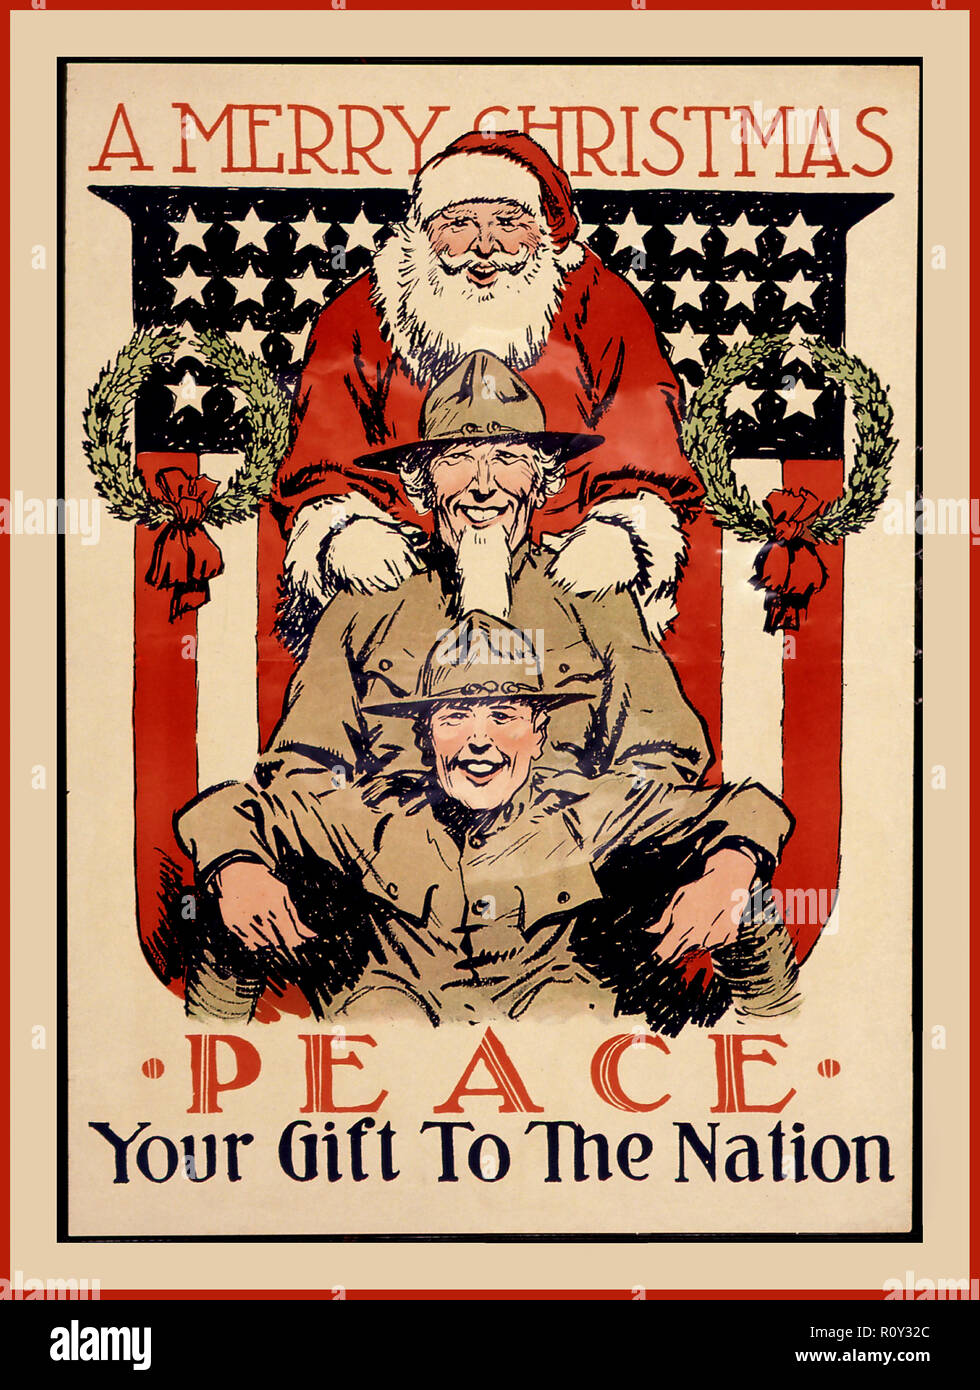 WWI A MERRY CHRISTMAS  *PEACE*  'your gift to the nation' USA PROPAGANDA POSTER 1915 American troops with a Father Christmas and the Stars and Stripes Flag as a background First World War World War One Stock Photo